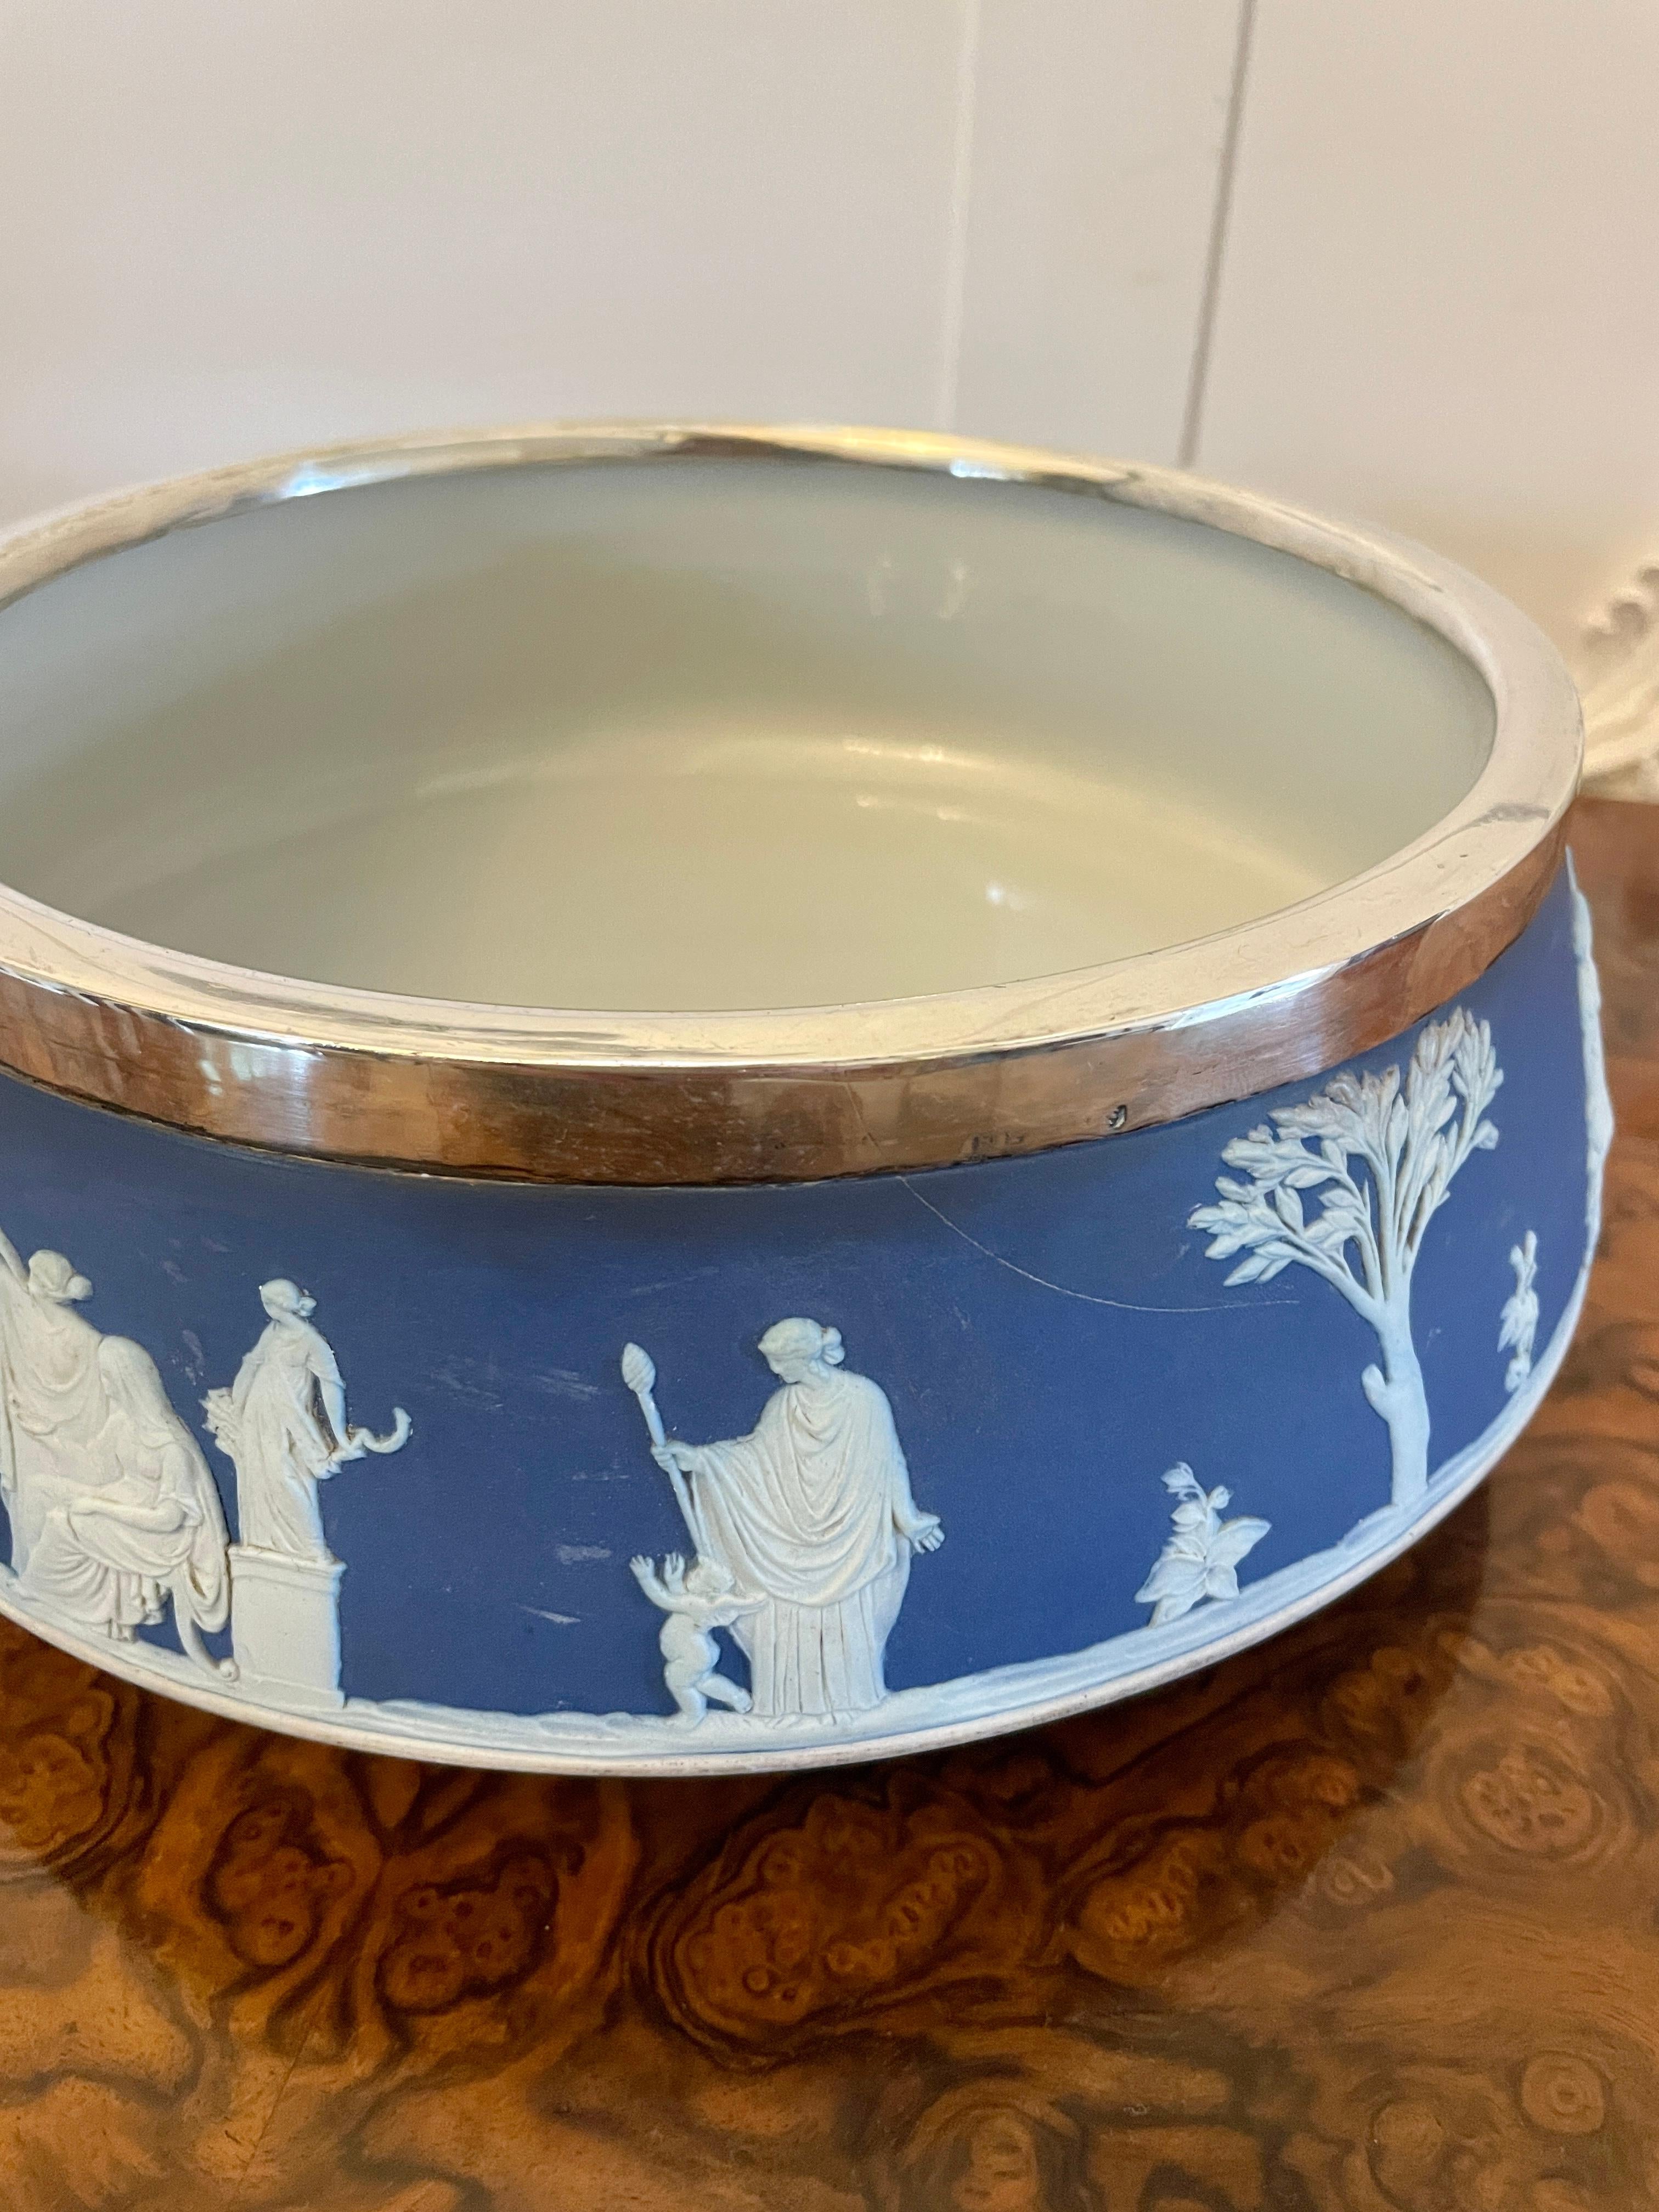  Antique Edwardian Quality Wedgwood Jasperware Fruit Bowl  In Good Condition For Sale In Suffolk, GB